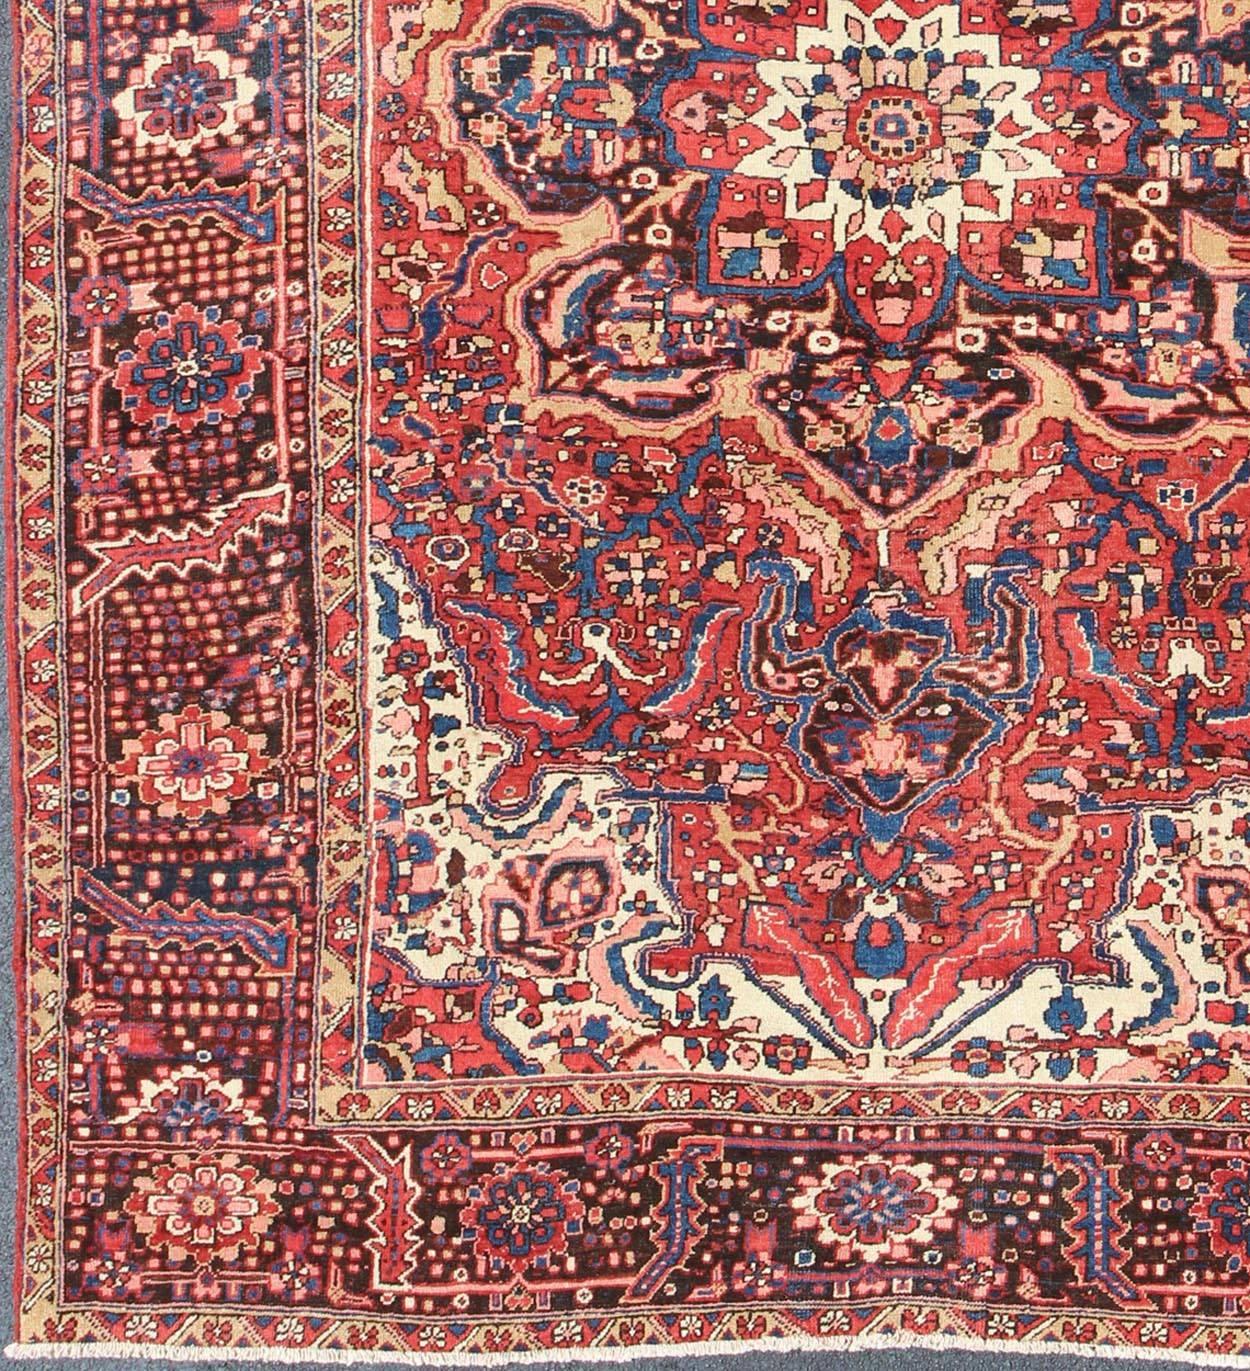 Semi Antique Mid century Persian Heriz rug with stylized medallion design in red and blue, rug h-610-04, country of origin / type: Iran / Heriz, circa 1950.

This magnificent antique Persian Heriz carpet from the mid-20th century (circa 1950) bears